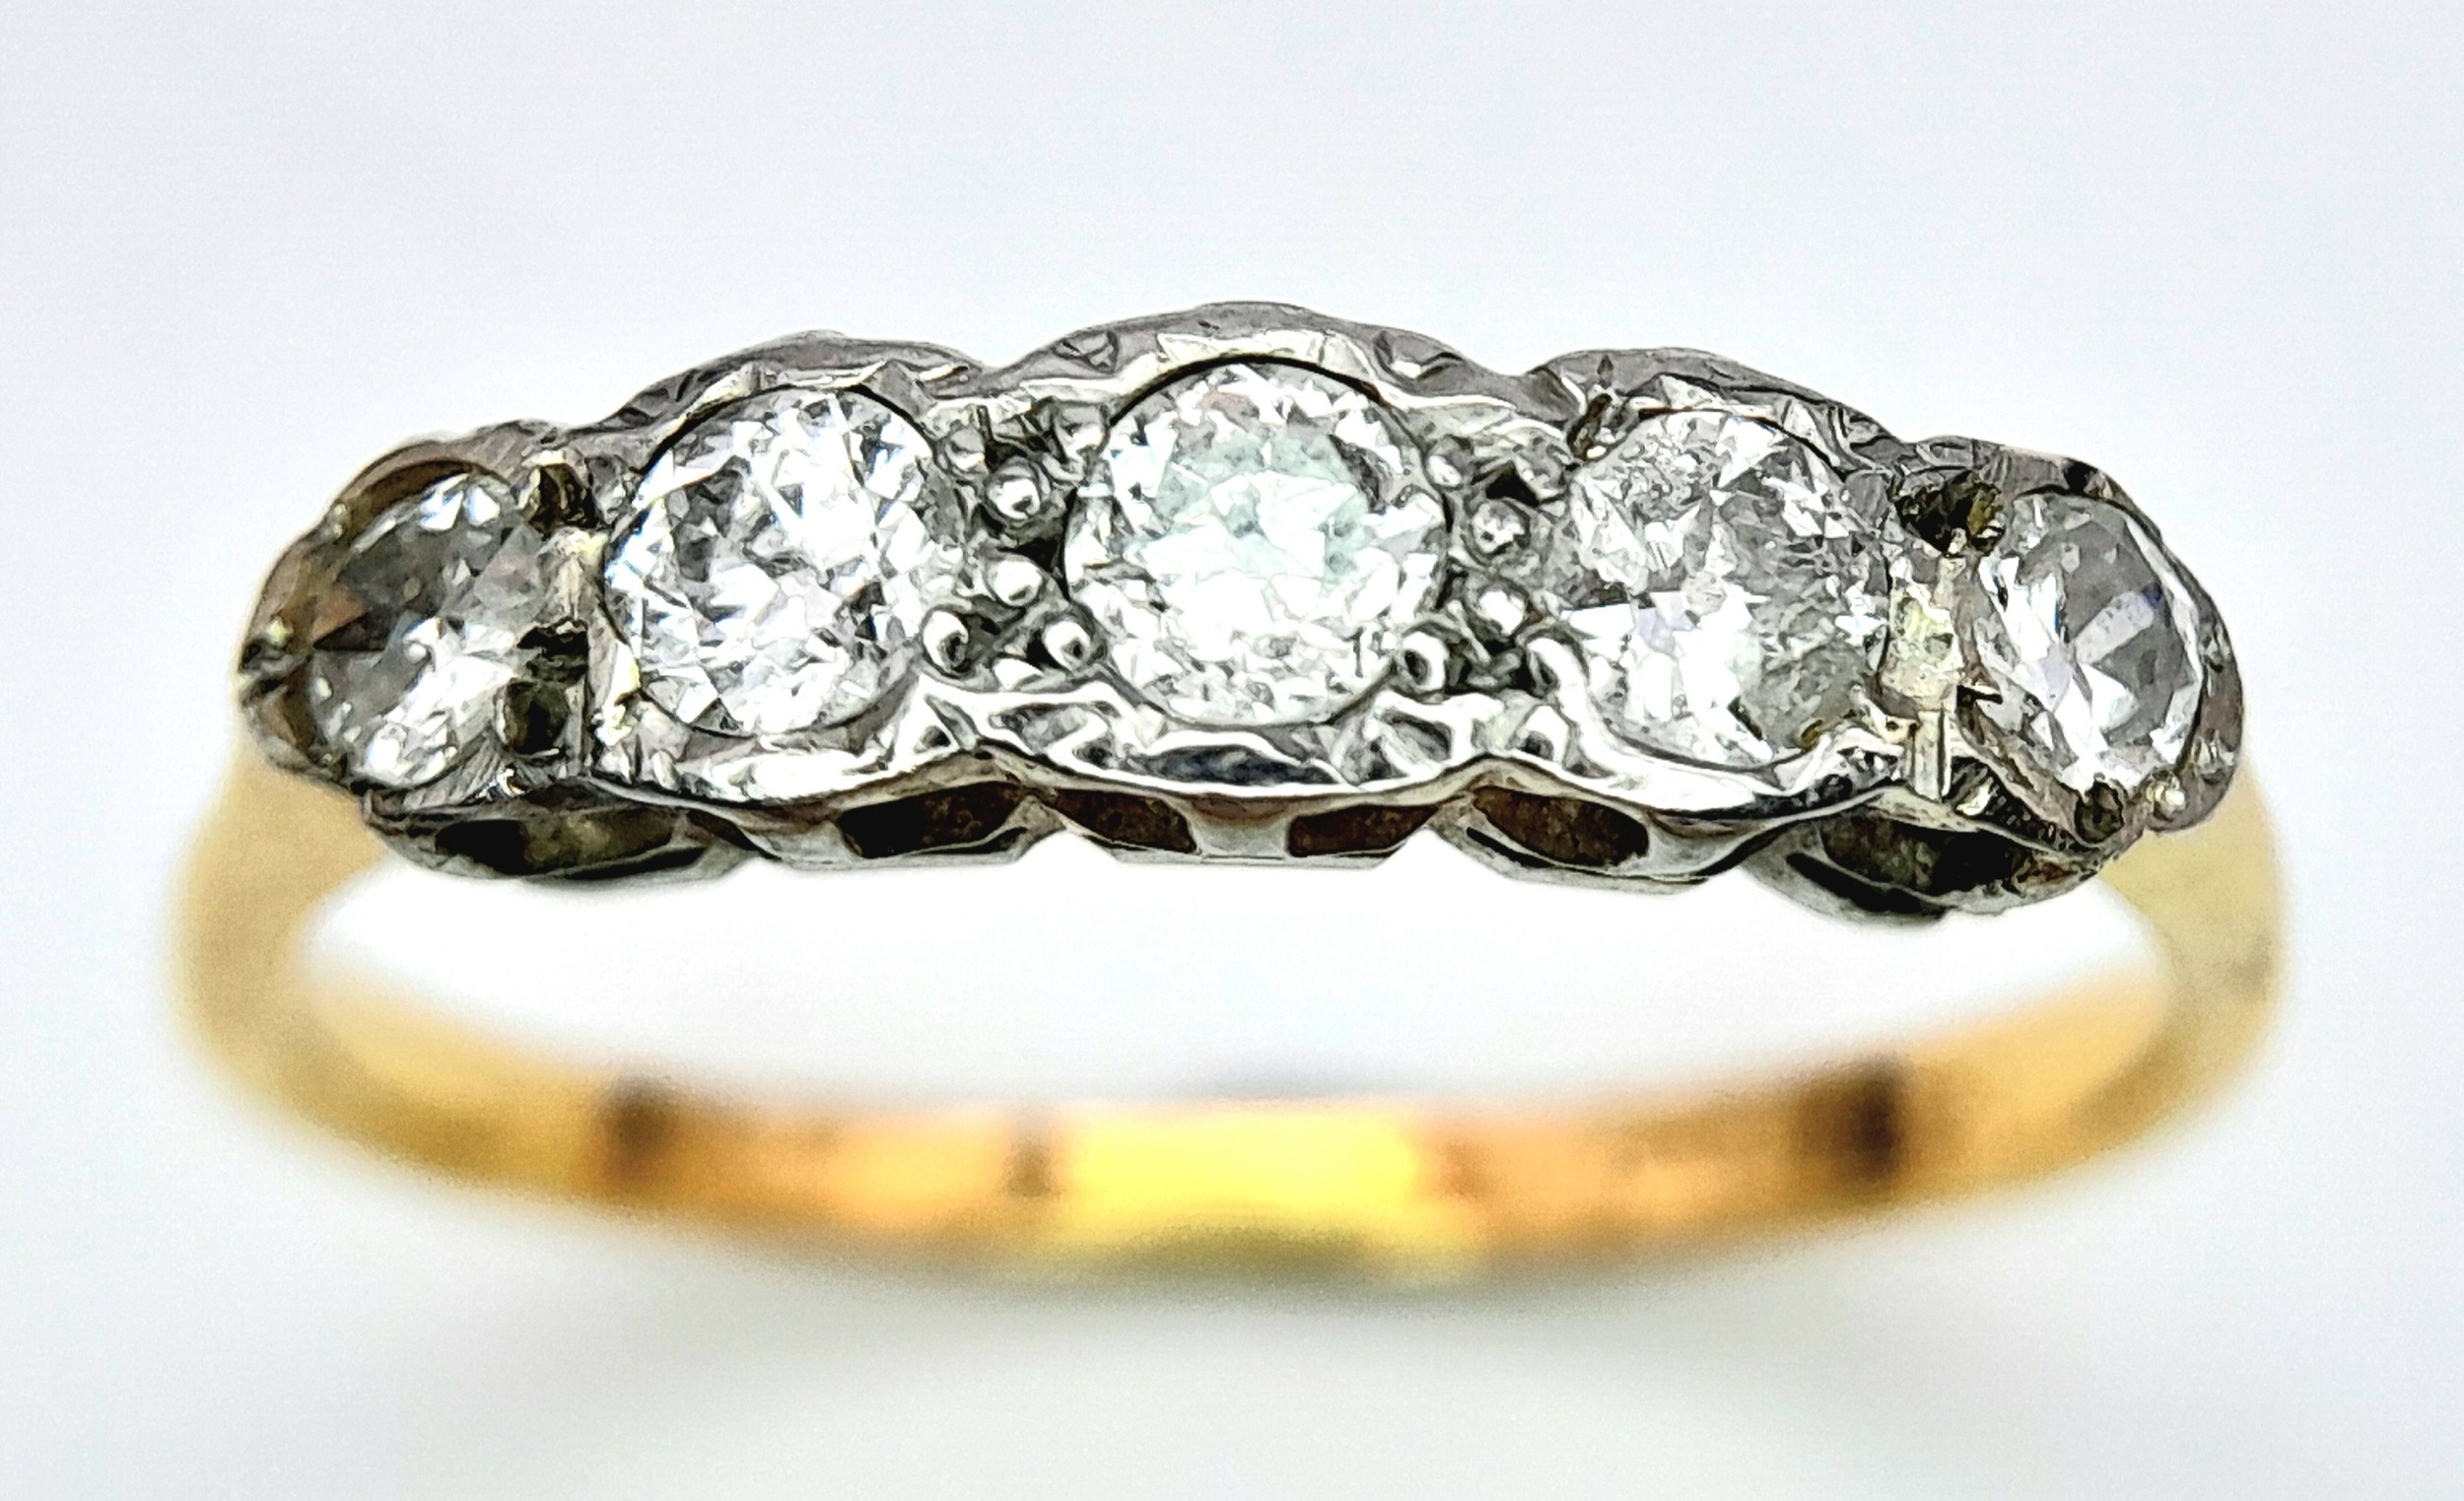 AN 18K YELLOW GOLD AND PLATINUM VINTAGE DIAMOND 5 STONE RING. 0.40CT. 2.5G. SIZE N - Image 2 of 6